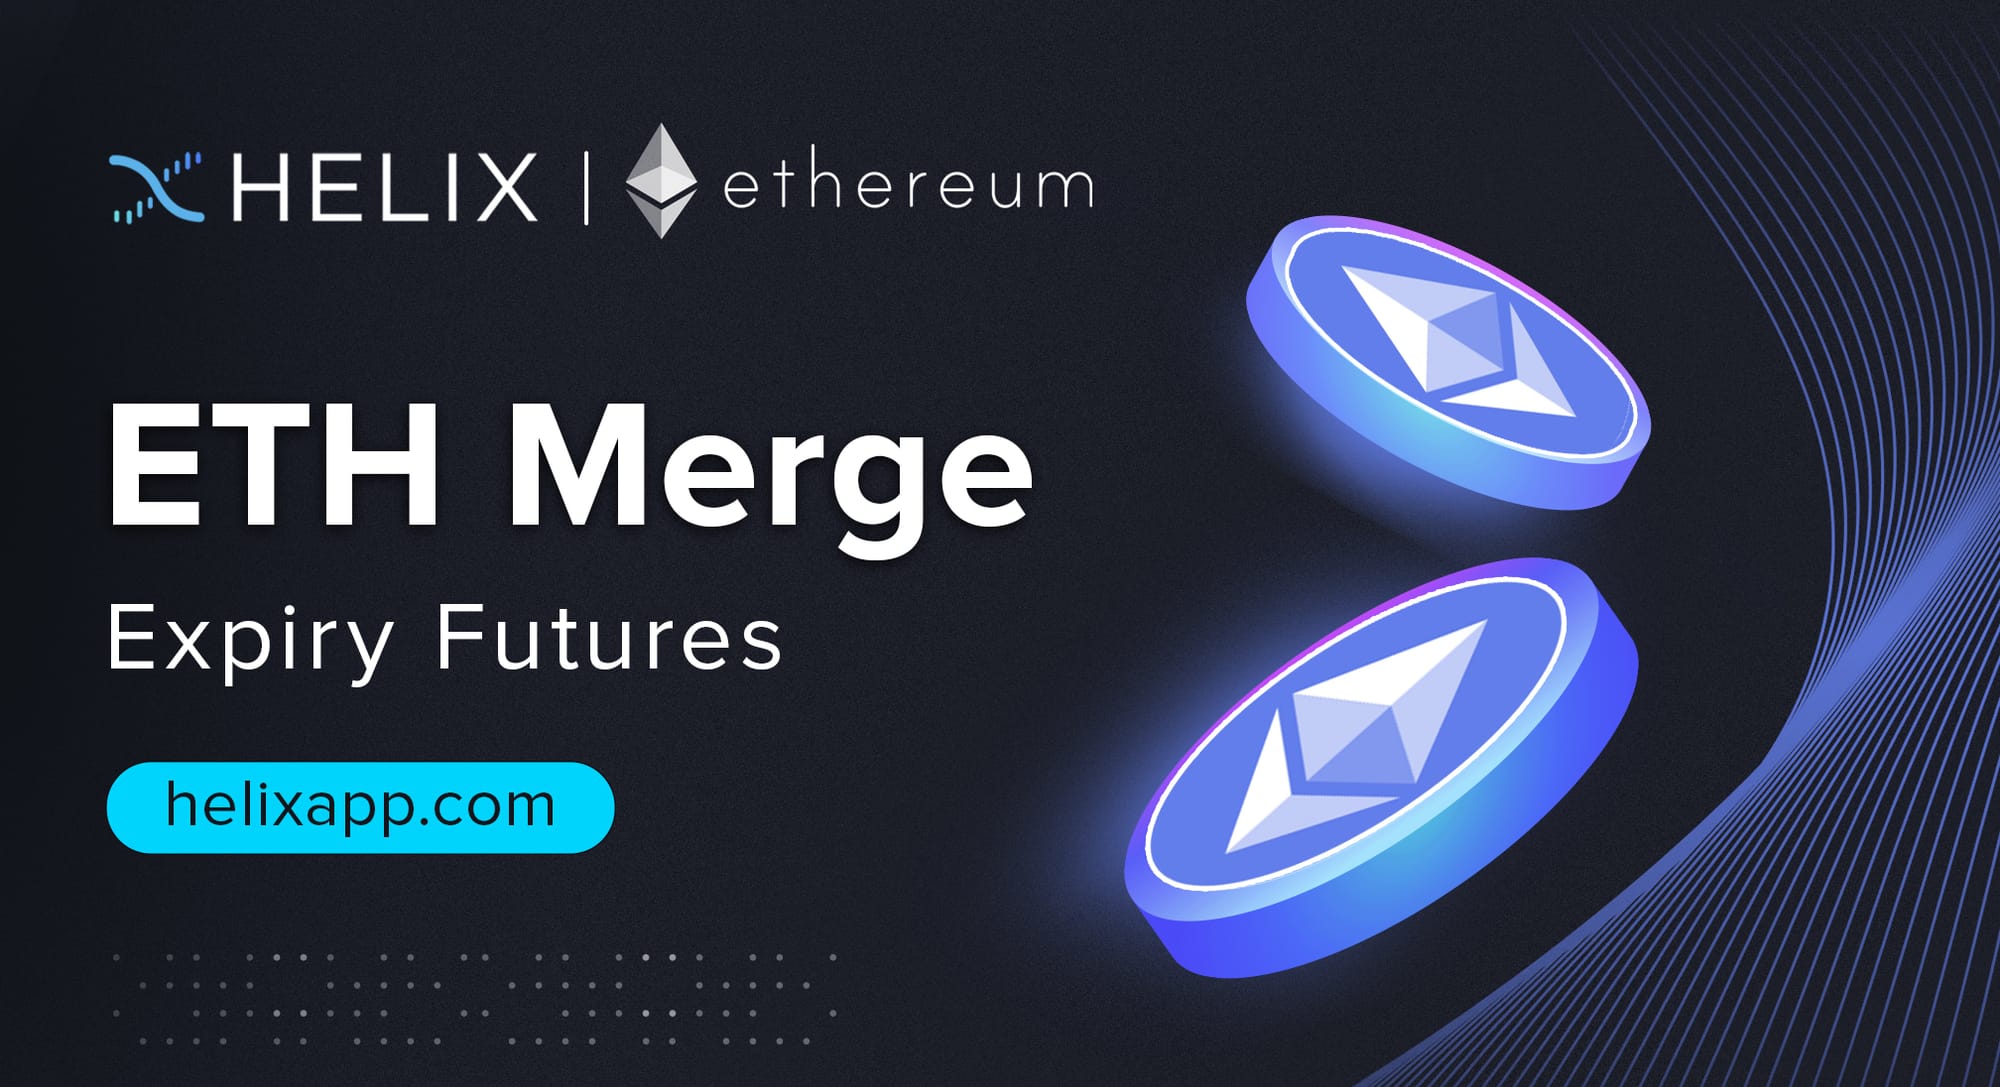 Decentralized ETH Merge Expiry Futures Listing on Helix